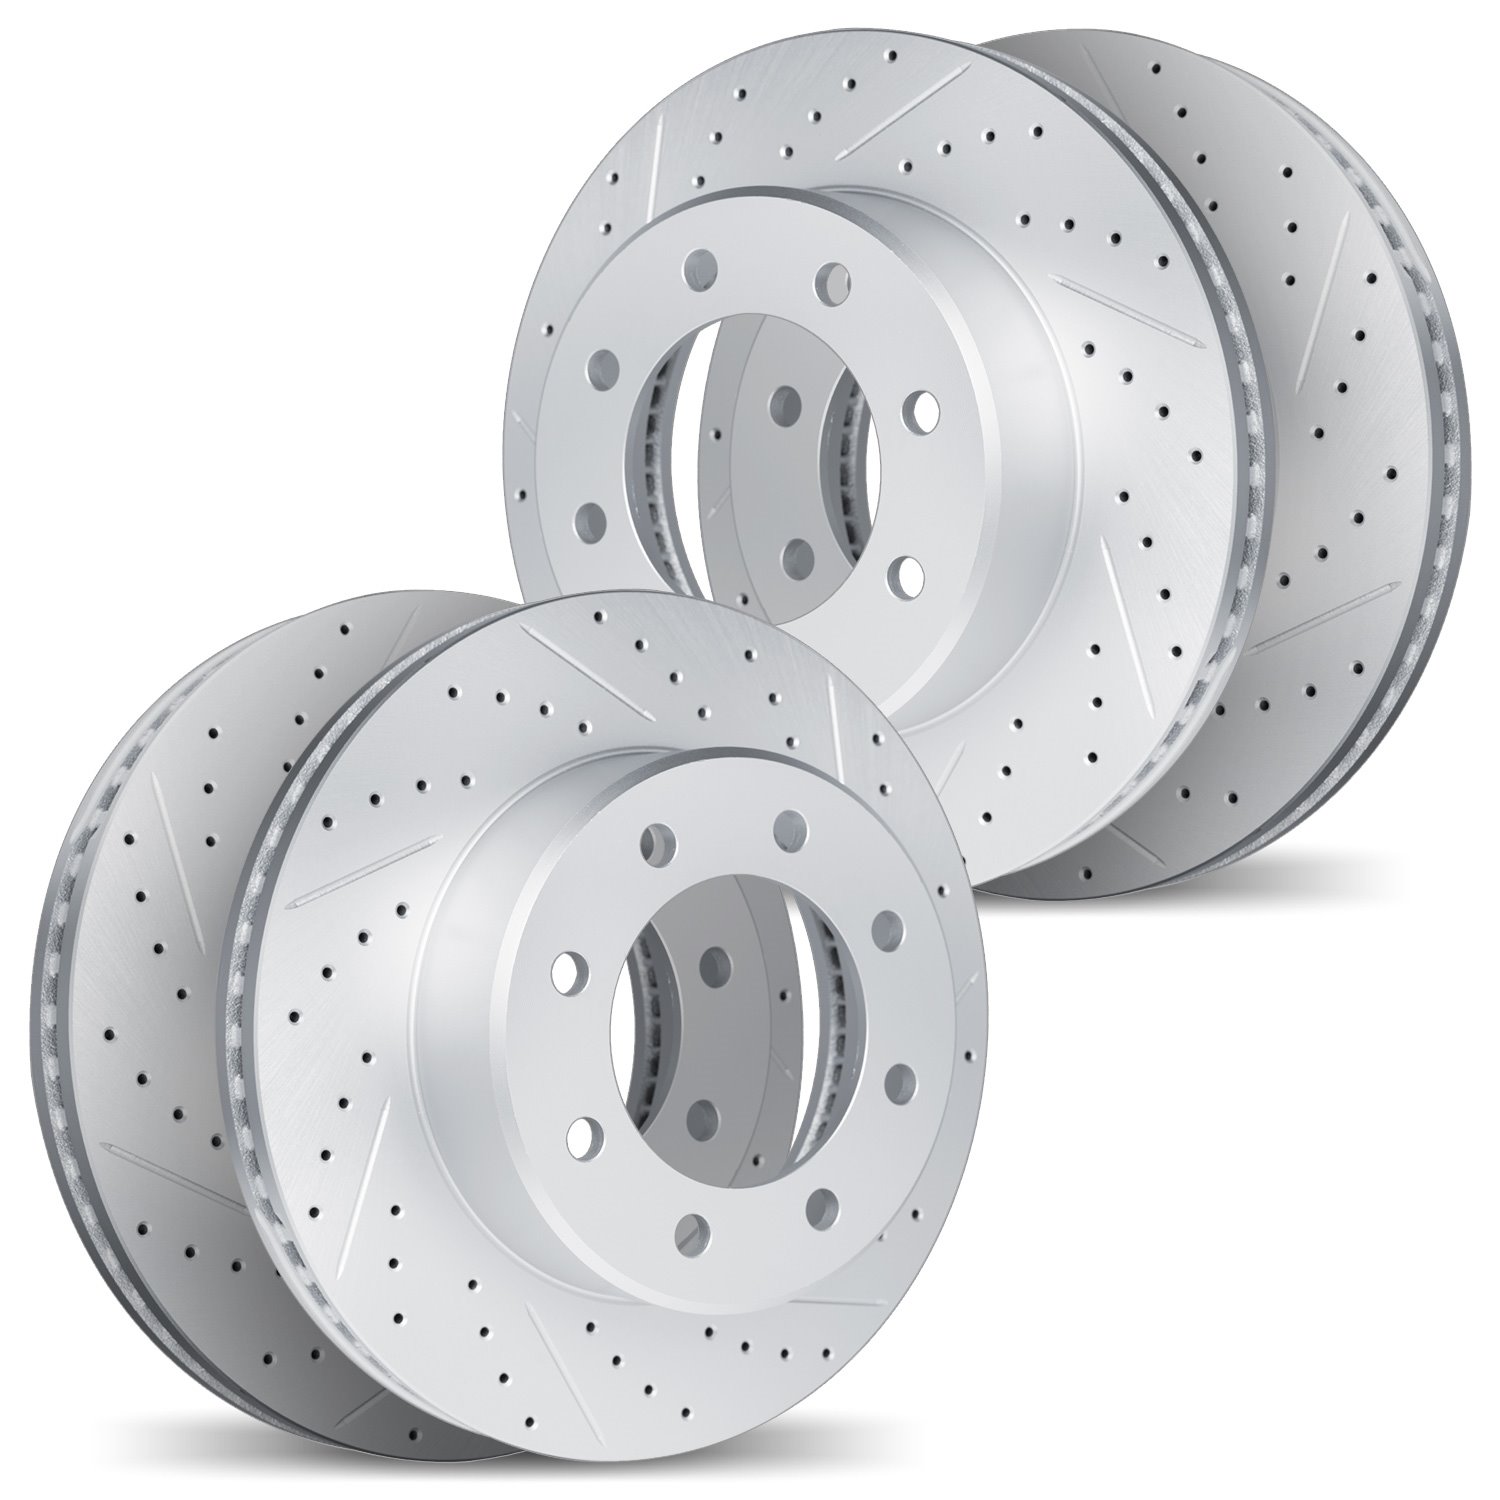 2004-54121 Geoperformance Drilled/Slotted Brake Rotors, 1999-1999 Ford/Lincoln/Mercury/Mazda, Position: Front and Rear